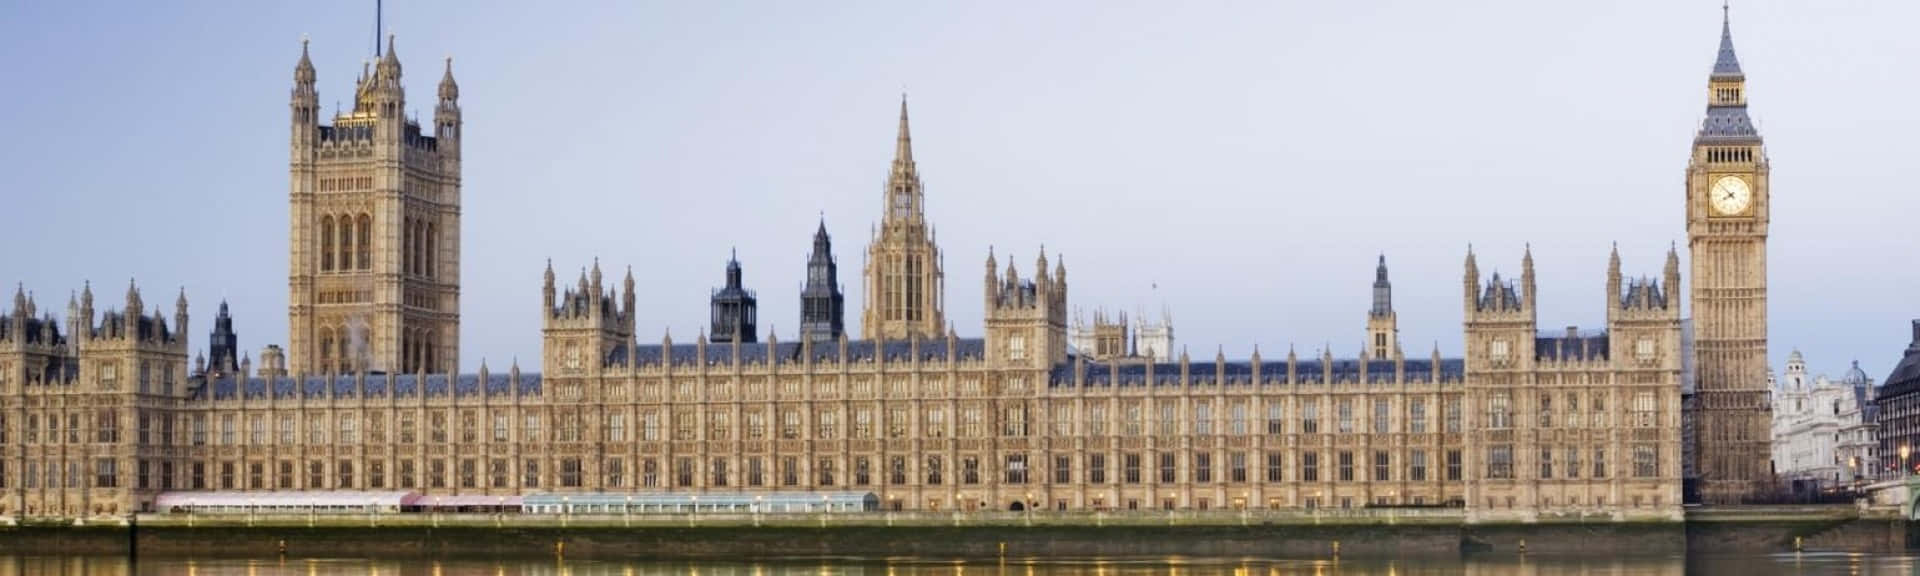 Caption: Majestic View Of The House Of Parliament At Sunset Wallpaper